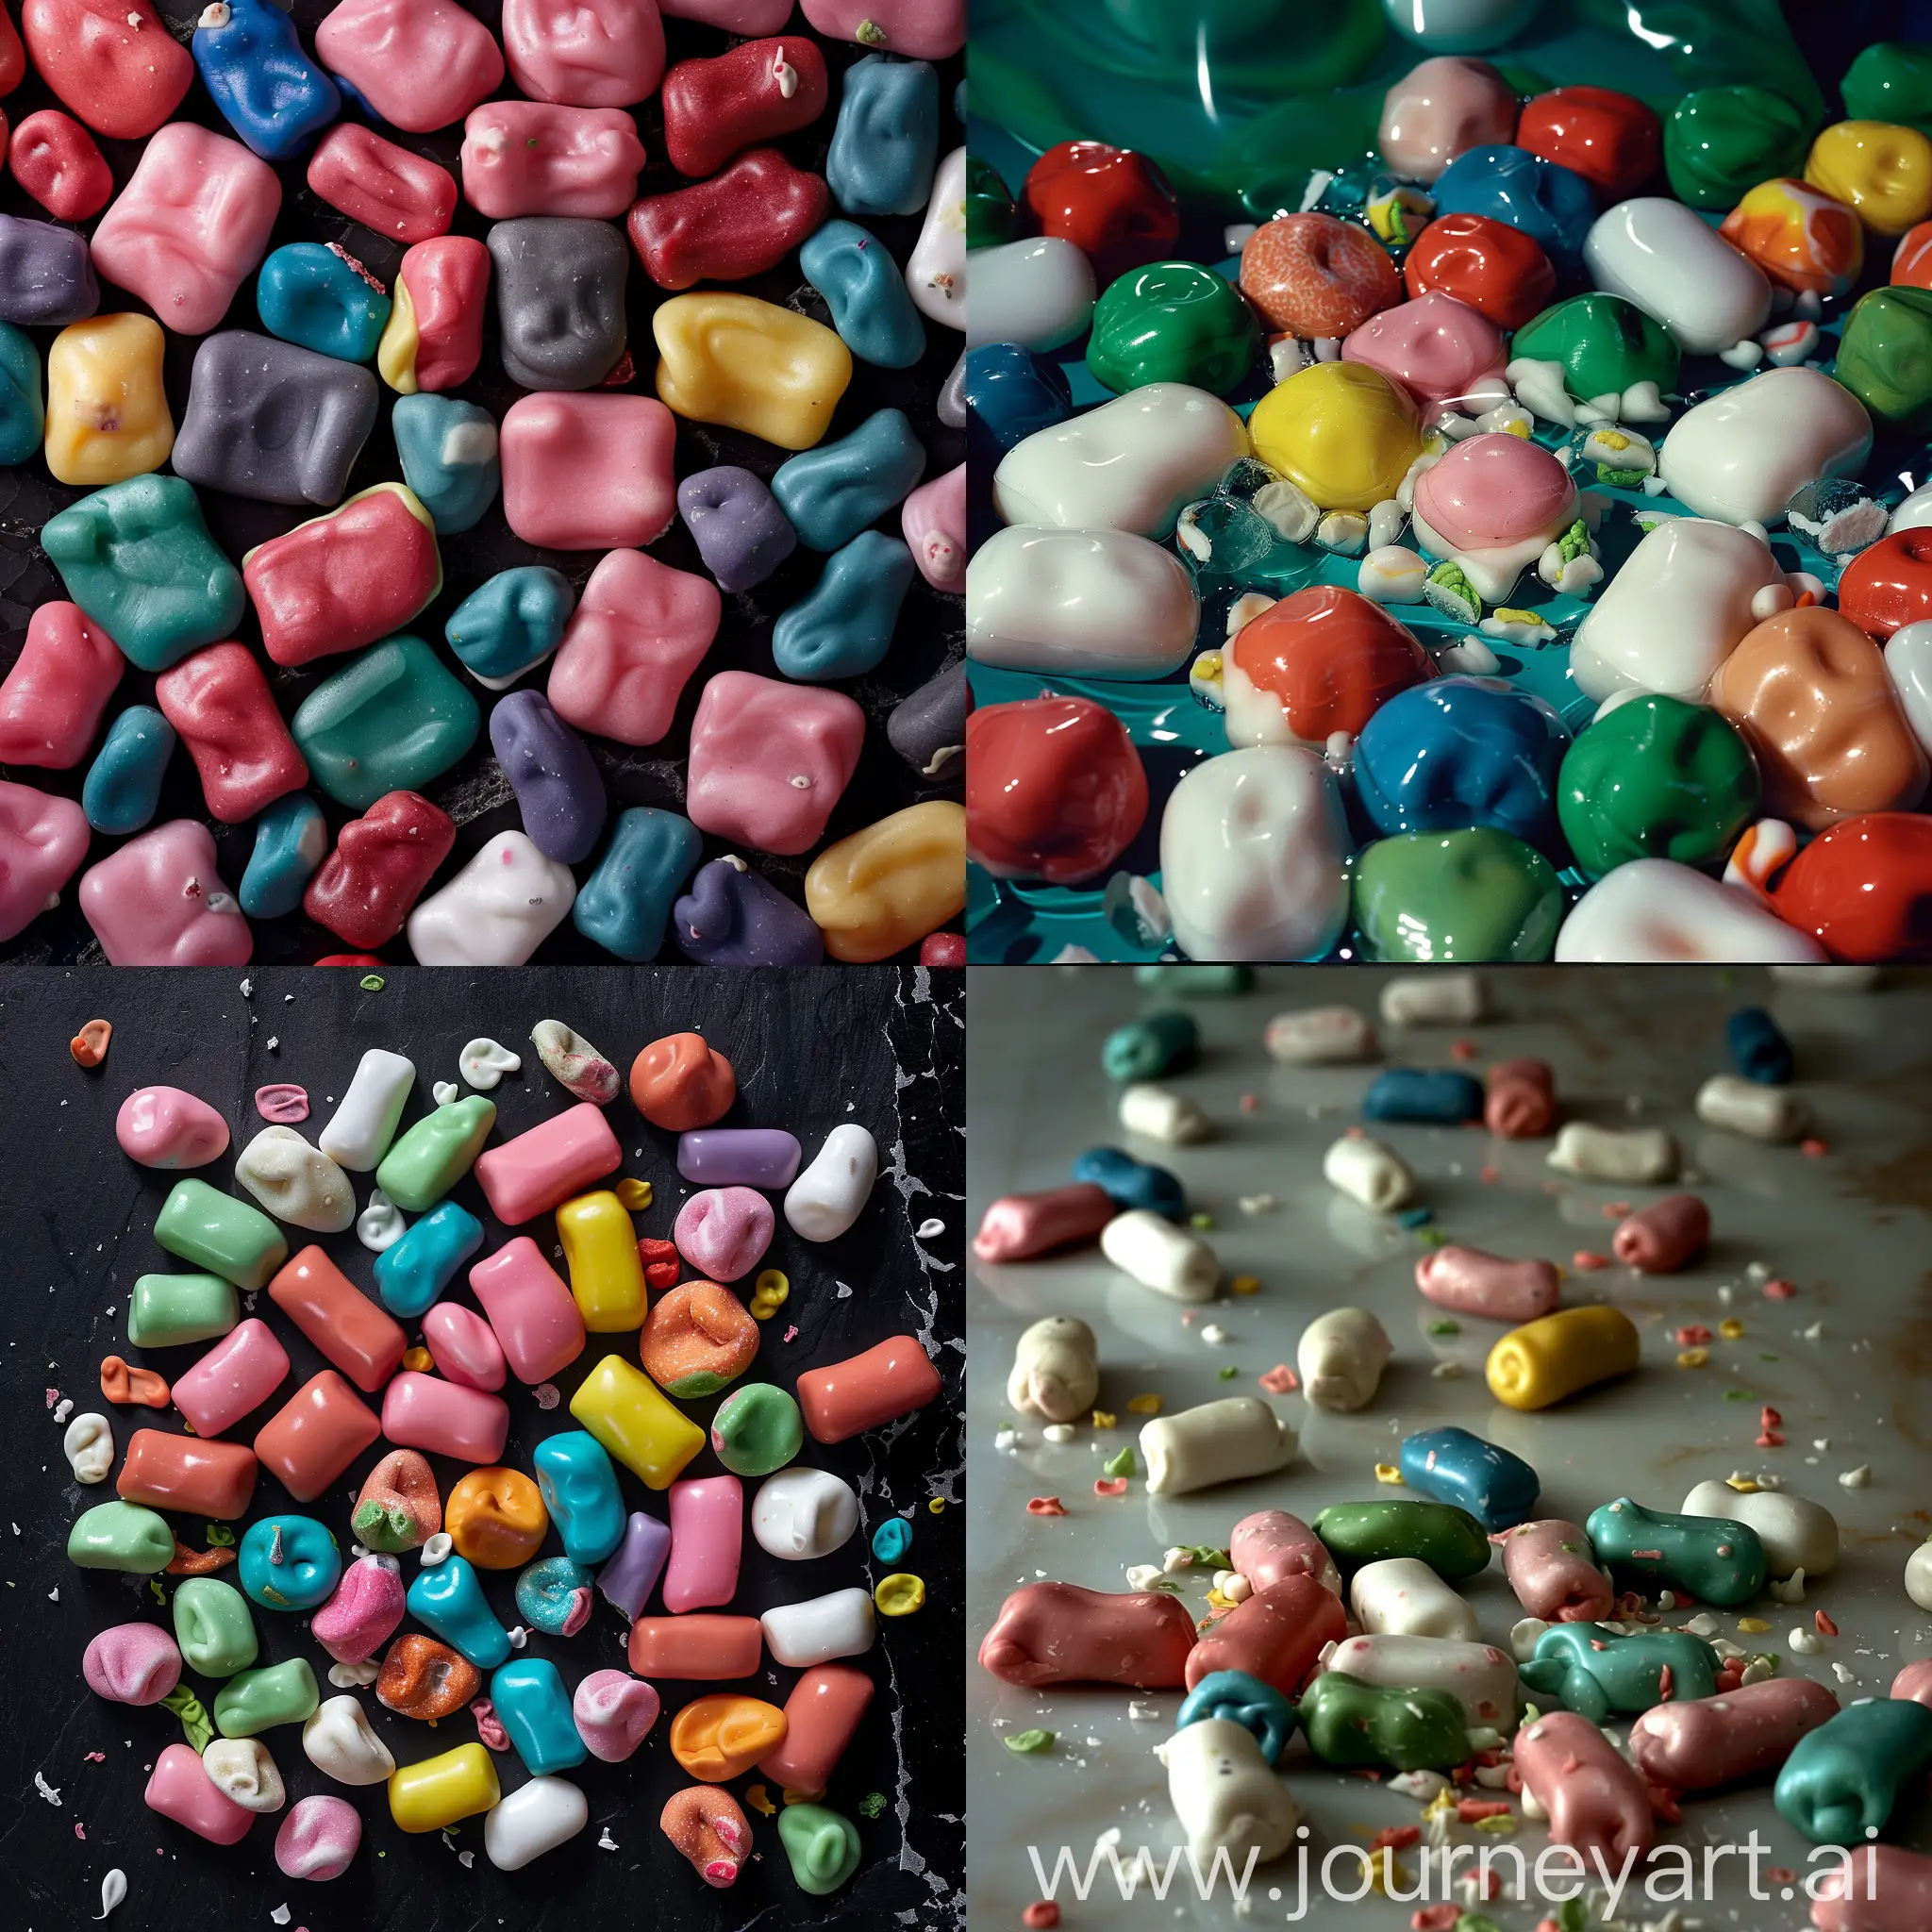 Creative-Chewing-Gum-Photography-Project